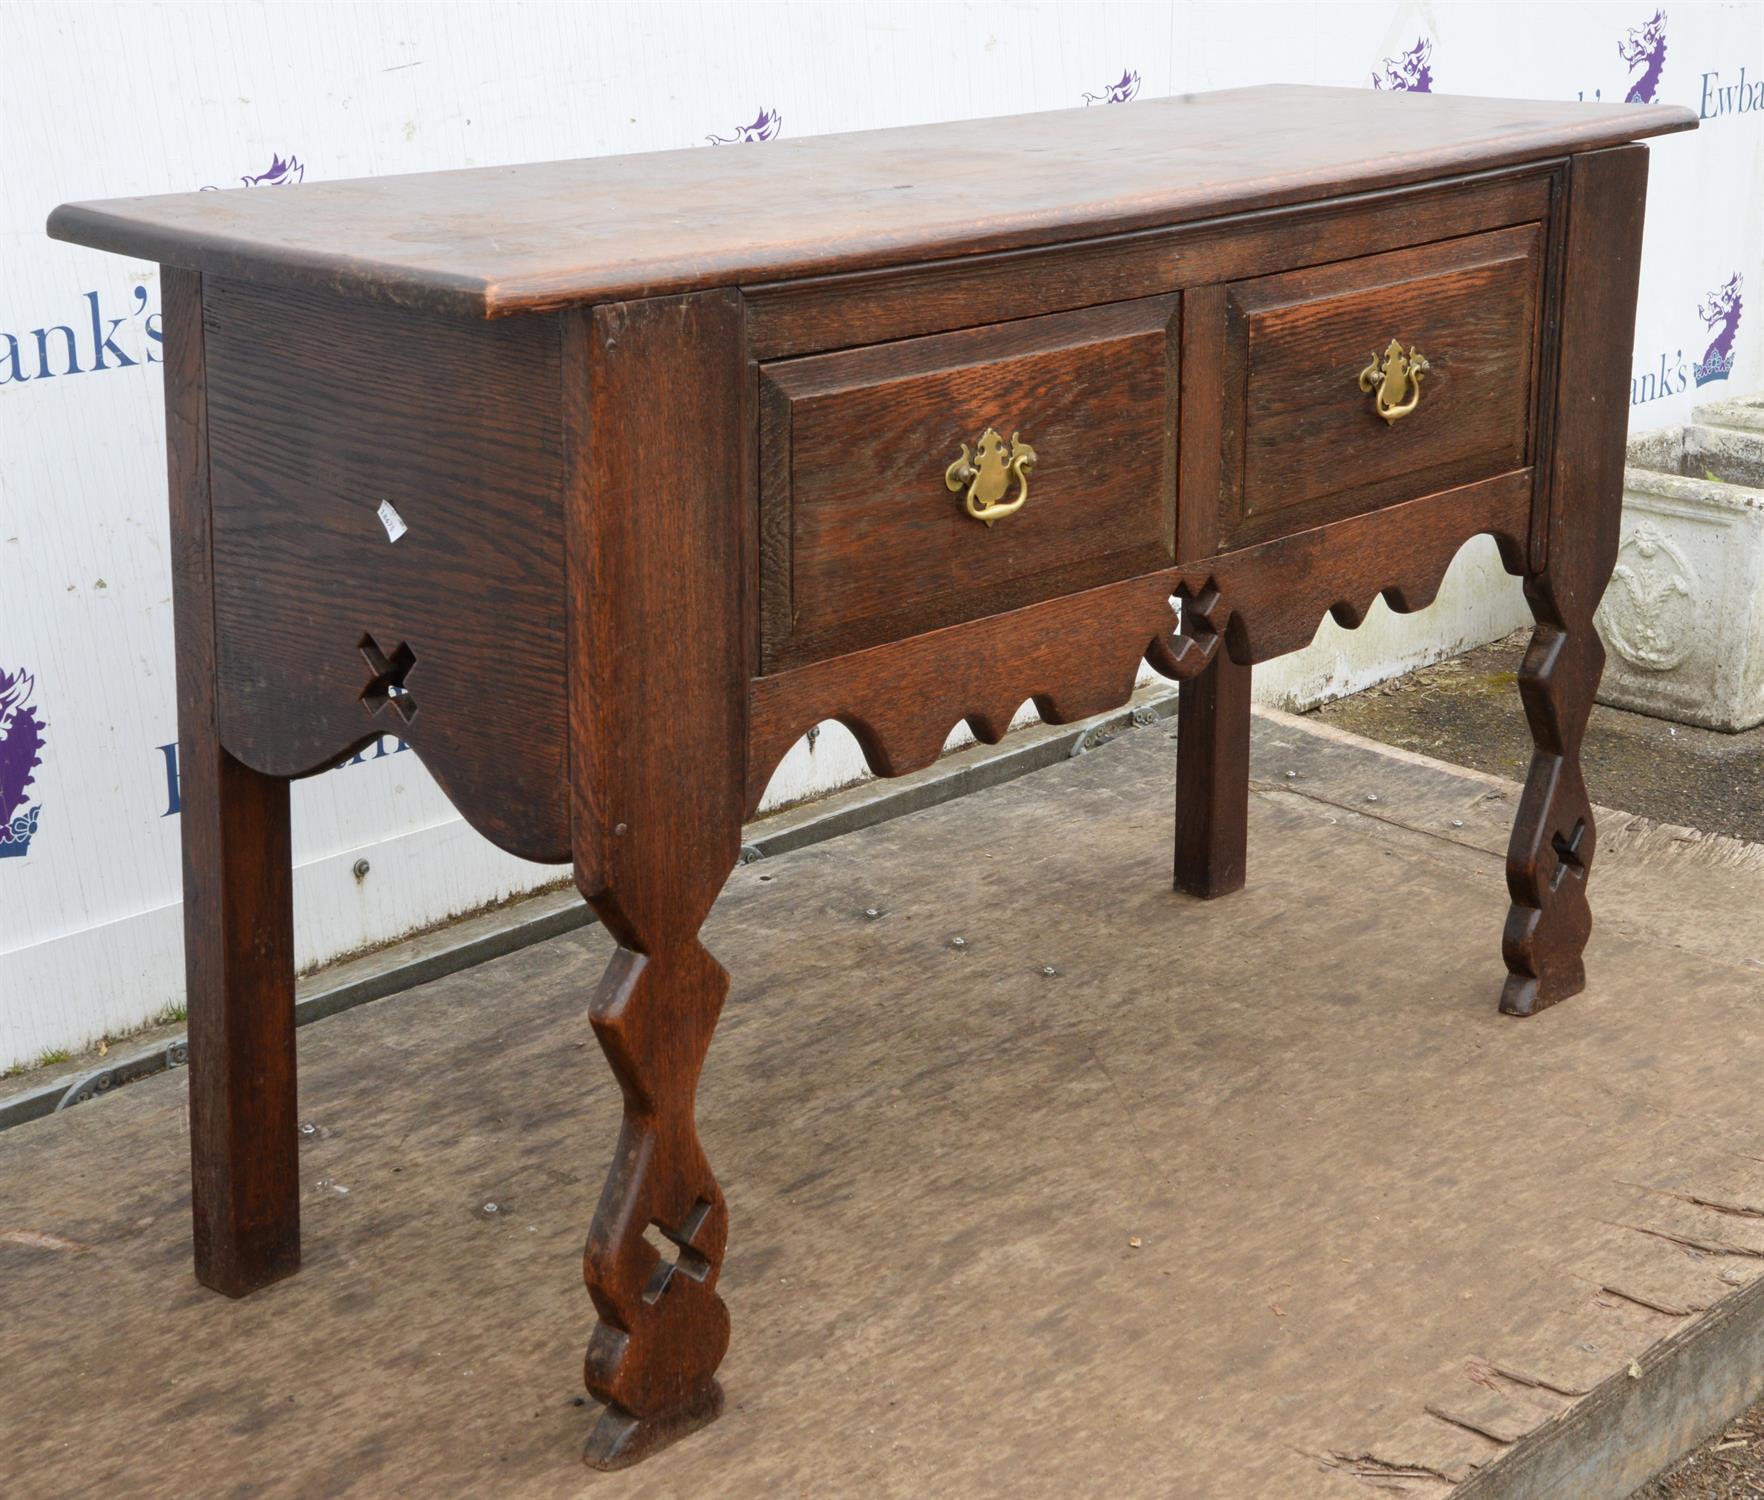 Oak side table, 20th Century, rectangular top, two frieze drawers, pierced stile legs, - Image 3 of 3